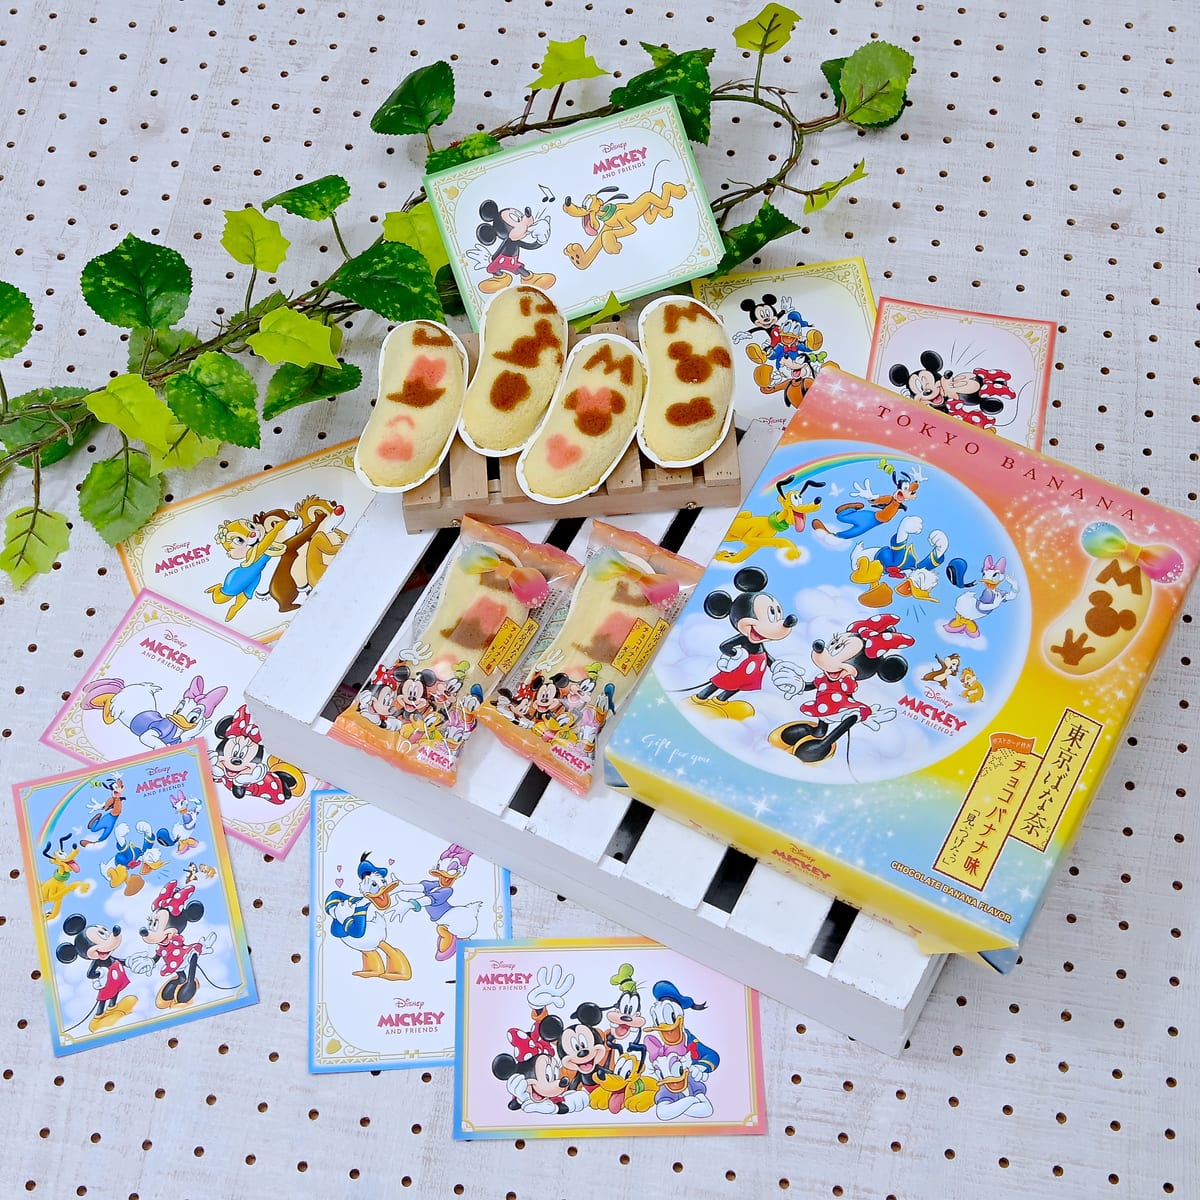 Disney SWEETS COLLECTION by 東京ばな奈『ミッキー＆フレンズ/東京ばな奈「⾒ぃつけたっ」』